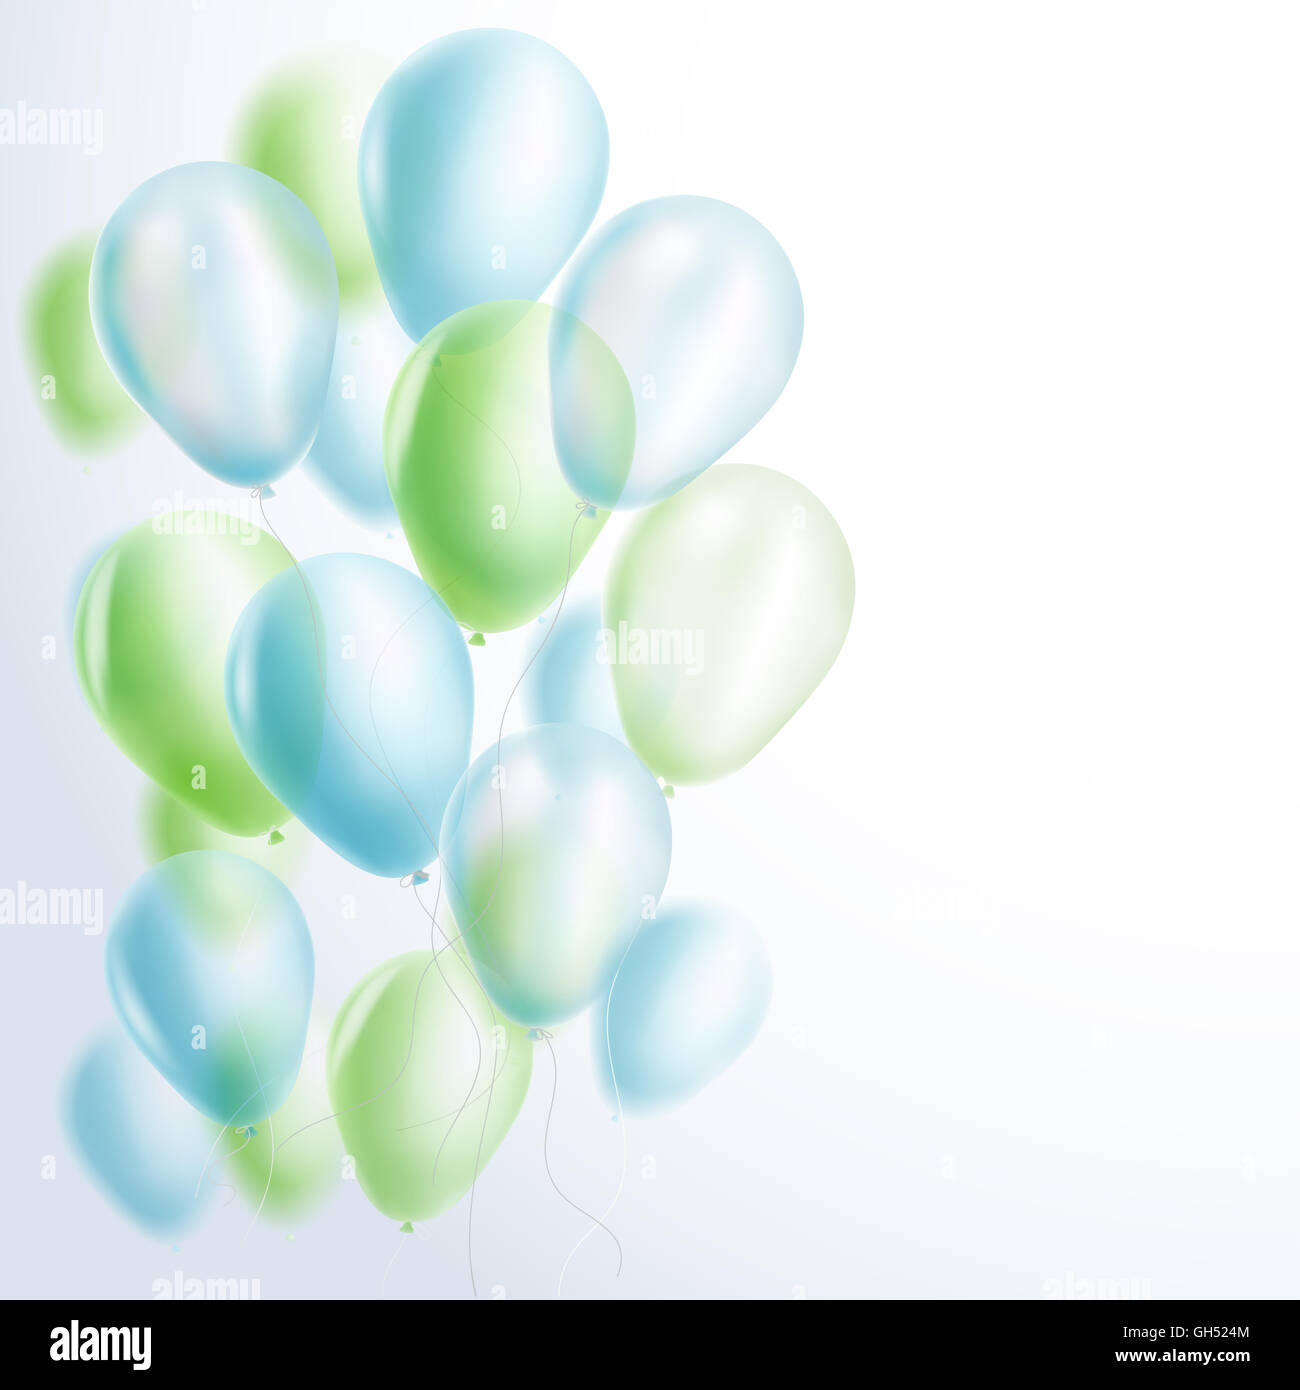 light blue and green balloons background Stock Photo